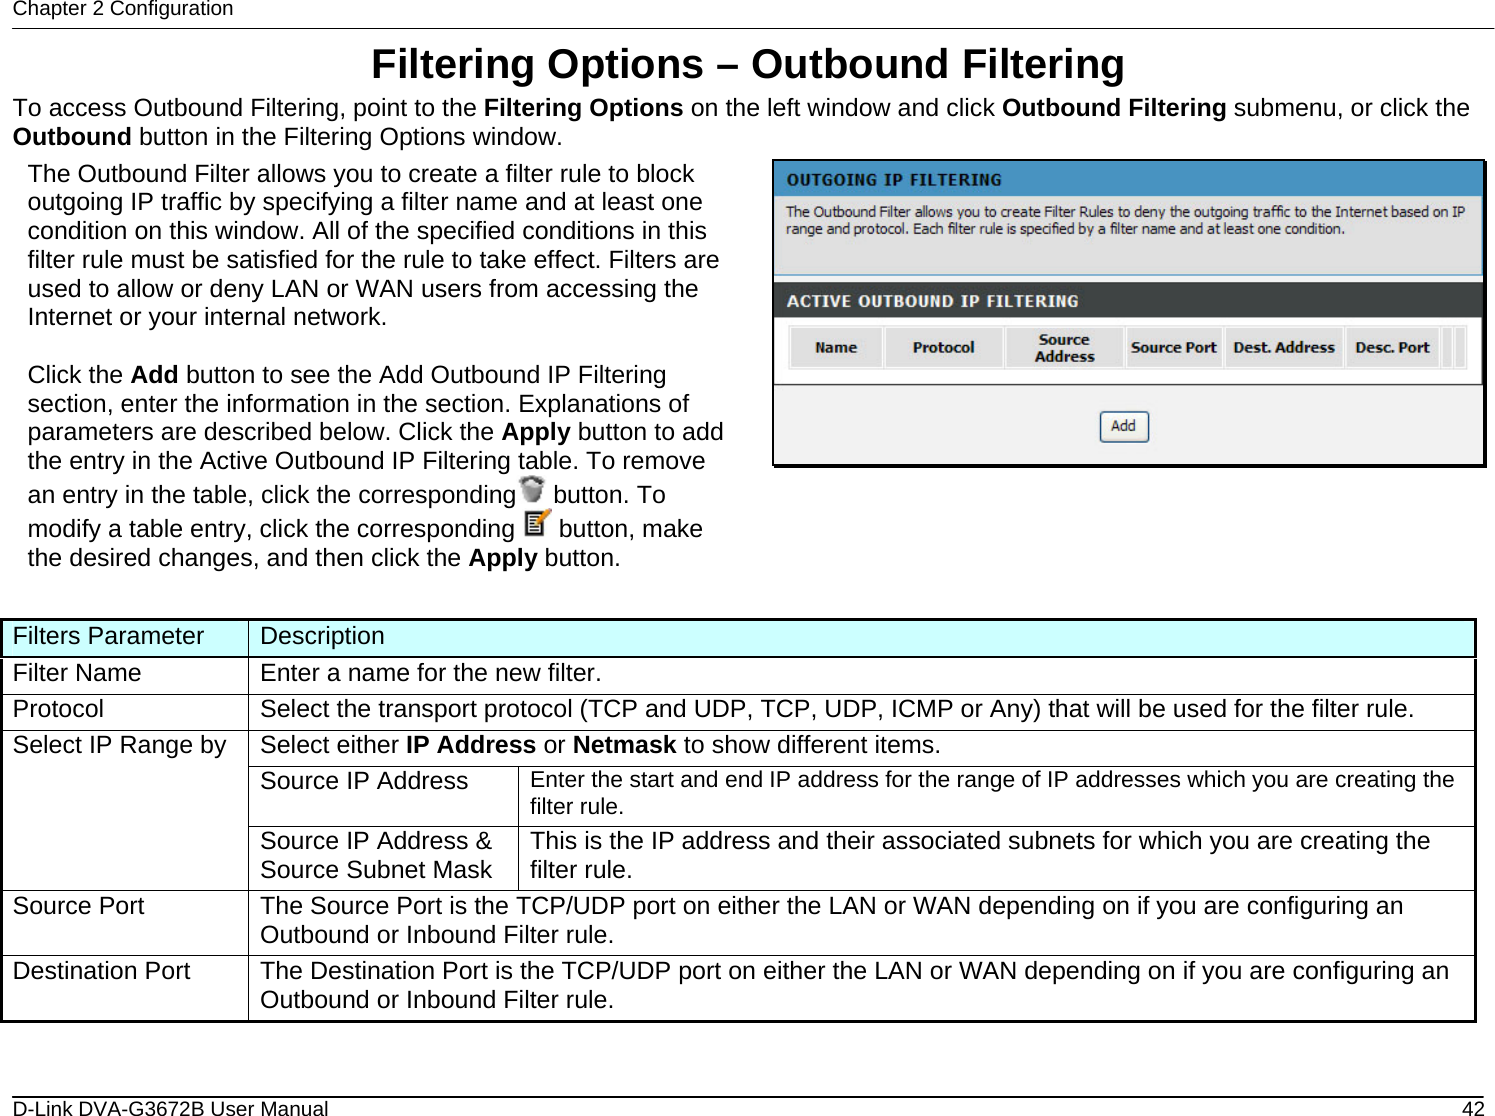 Chapter 2 Configuration Filtering Options – Outbound Filtering To access Outbound Filtering, point to the Filtering Options on the left window and click Outbound Filtering submenu, or click the Outbound button in the Filtering Options window. The Outbound Filter allows you to create a filter rule to block outgoing IP traffic by specifying a filter name and at least one condition on this window. All of the specified conditions in this filter rule must be satisfied for the rule to take effect. Filters are used to allow or deny LAN or WAN users from accessing the Internet or your internal network.  Click the Add button to see the Add Outbound IP Filtering section, enter the information in the section. Explanations of parameters are described below. Click the Apply button to add the entry in the Active Outbound IP Filtering table. To remove an entry in the table, click the corresponding  button. To modify a table entry, click the corresponding   button, make the desired changes, and then click the Apply button.       Filters Parameter  Description Filter Name  Enter a name for the new filter. Protocol  Select the transport protocol (TCP and UDP, TCP, UDP, ICMP or Any) that will be used for the filter rule. Select either IP Address or Netmask to show different items. Source IP Address  Enter the start and end IP address for the range of IP addresses which you are creating the filter rule. Select IP Range by Source IP Address &amp; Source Subnet Mask  This is the IP address and their associated subnets for which you are creating the filter rule. Source Port  The Source Port is the TCP/UDP port on either the LAN or WAN depending on if you are configuring an Outbound or Inbound Filter rule. Destination Port  The Destination Port is the TCP/UDP port on either the LAN or WAN depending on if you are configuring an Outbound or Inbound Filter rule.  D-Link DVA-G3672B User Manual  42